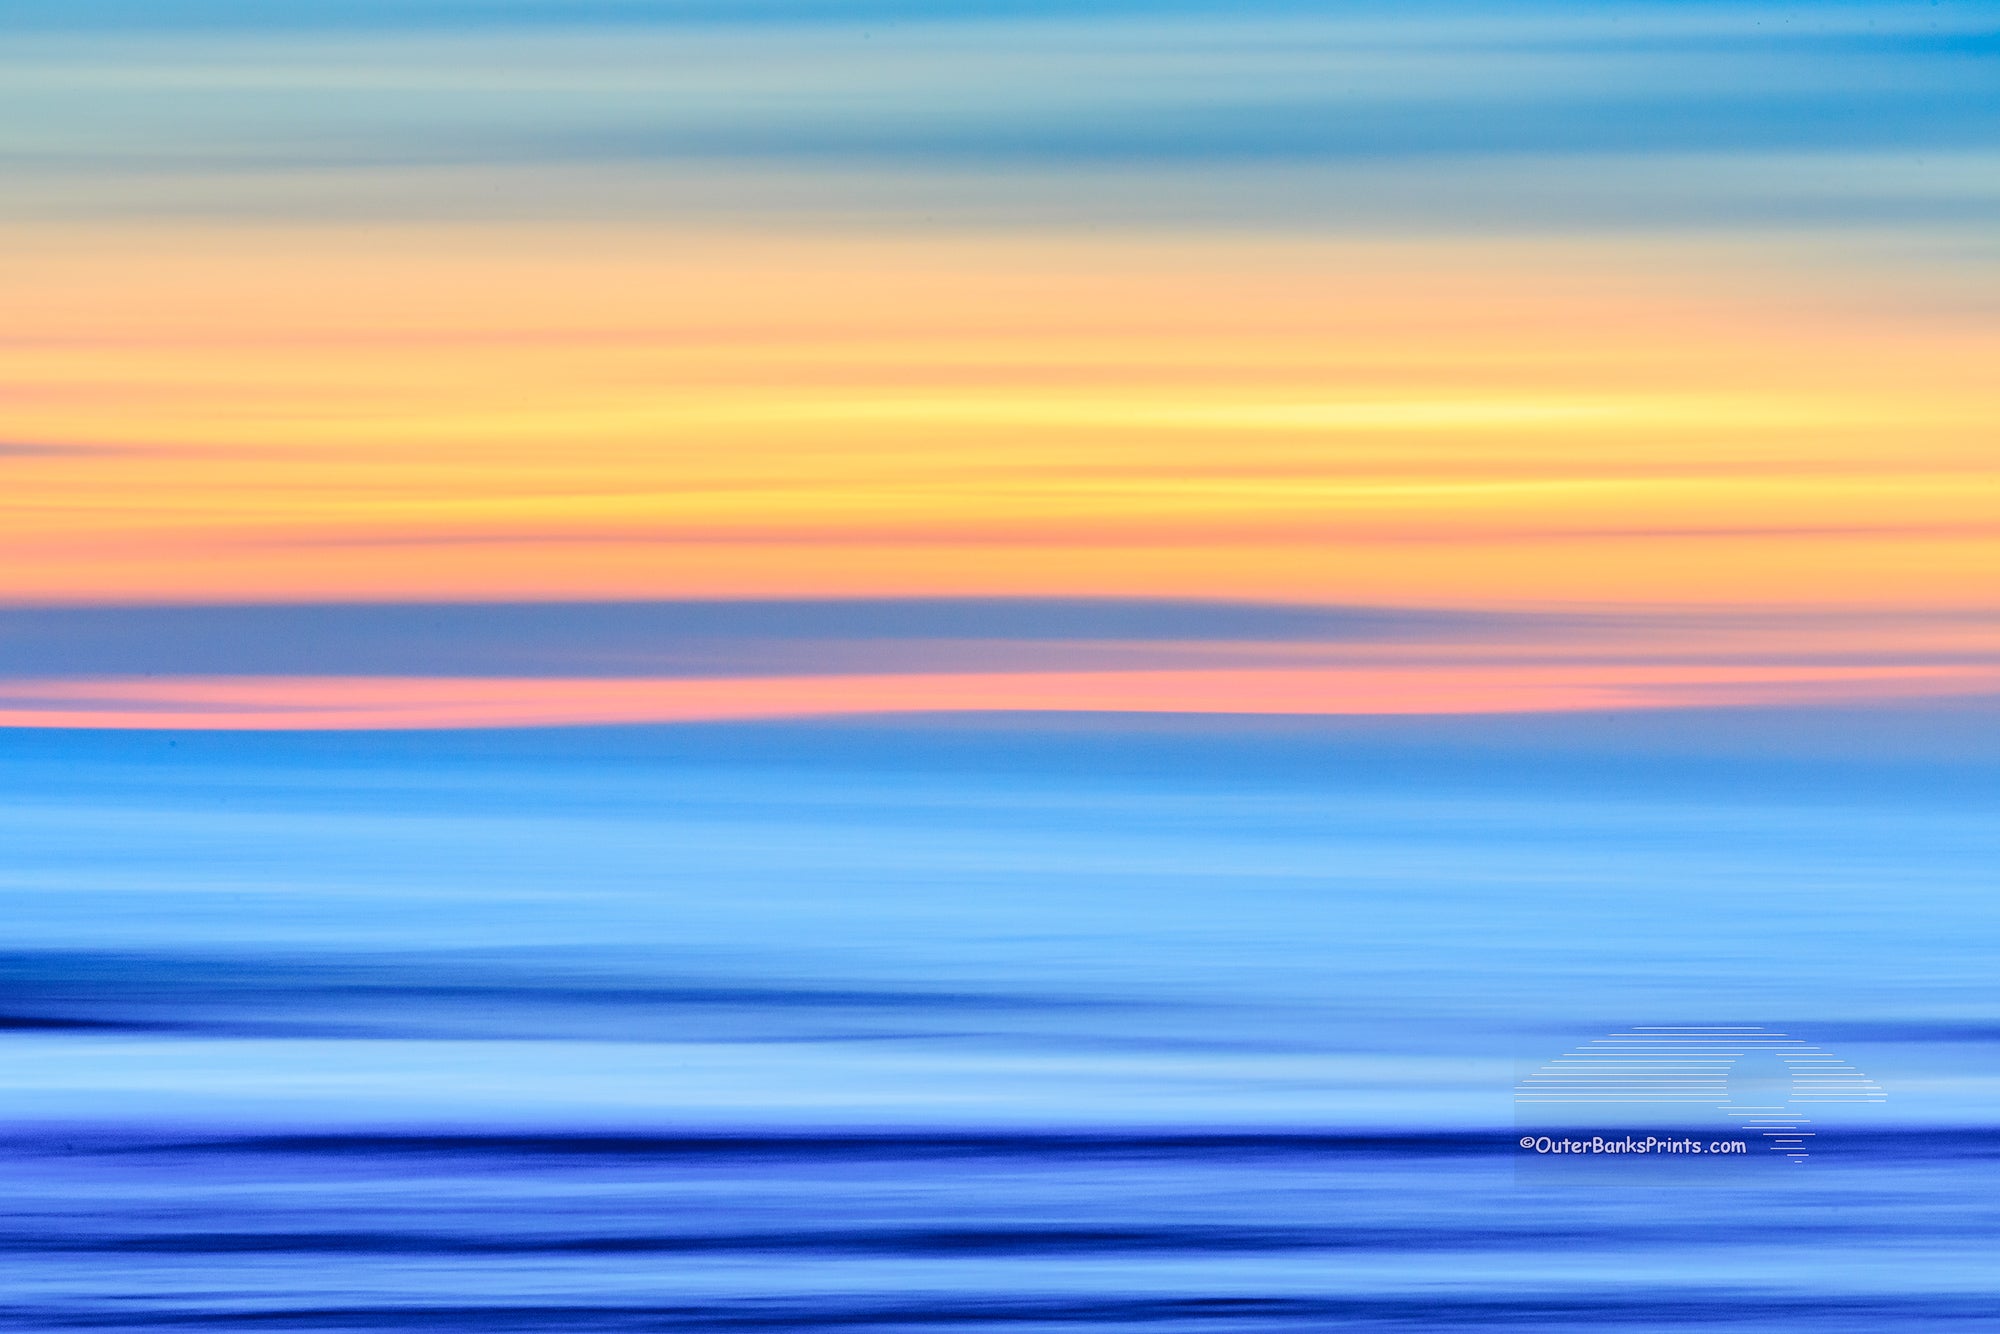 A Outer Banks beach sunrise reduced to colors and lines. Using camera movement during a long exposure to blur the beach and ocean.